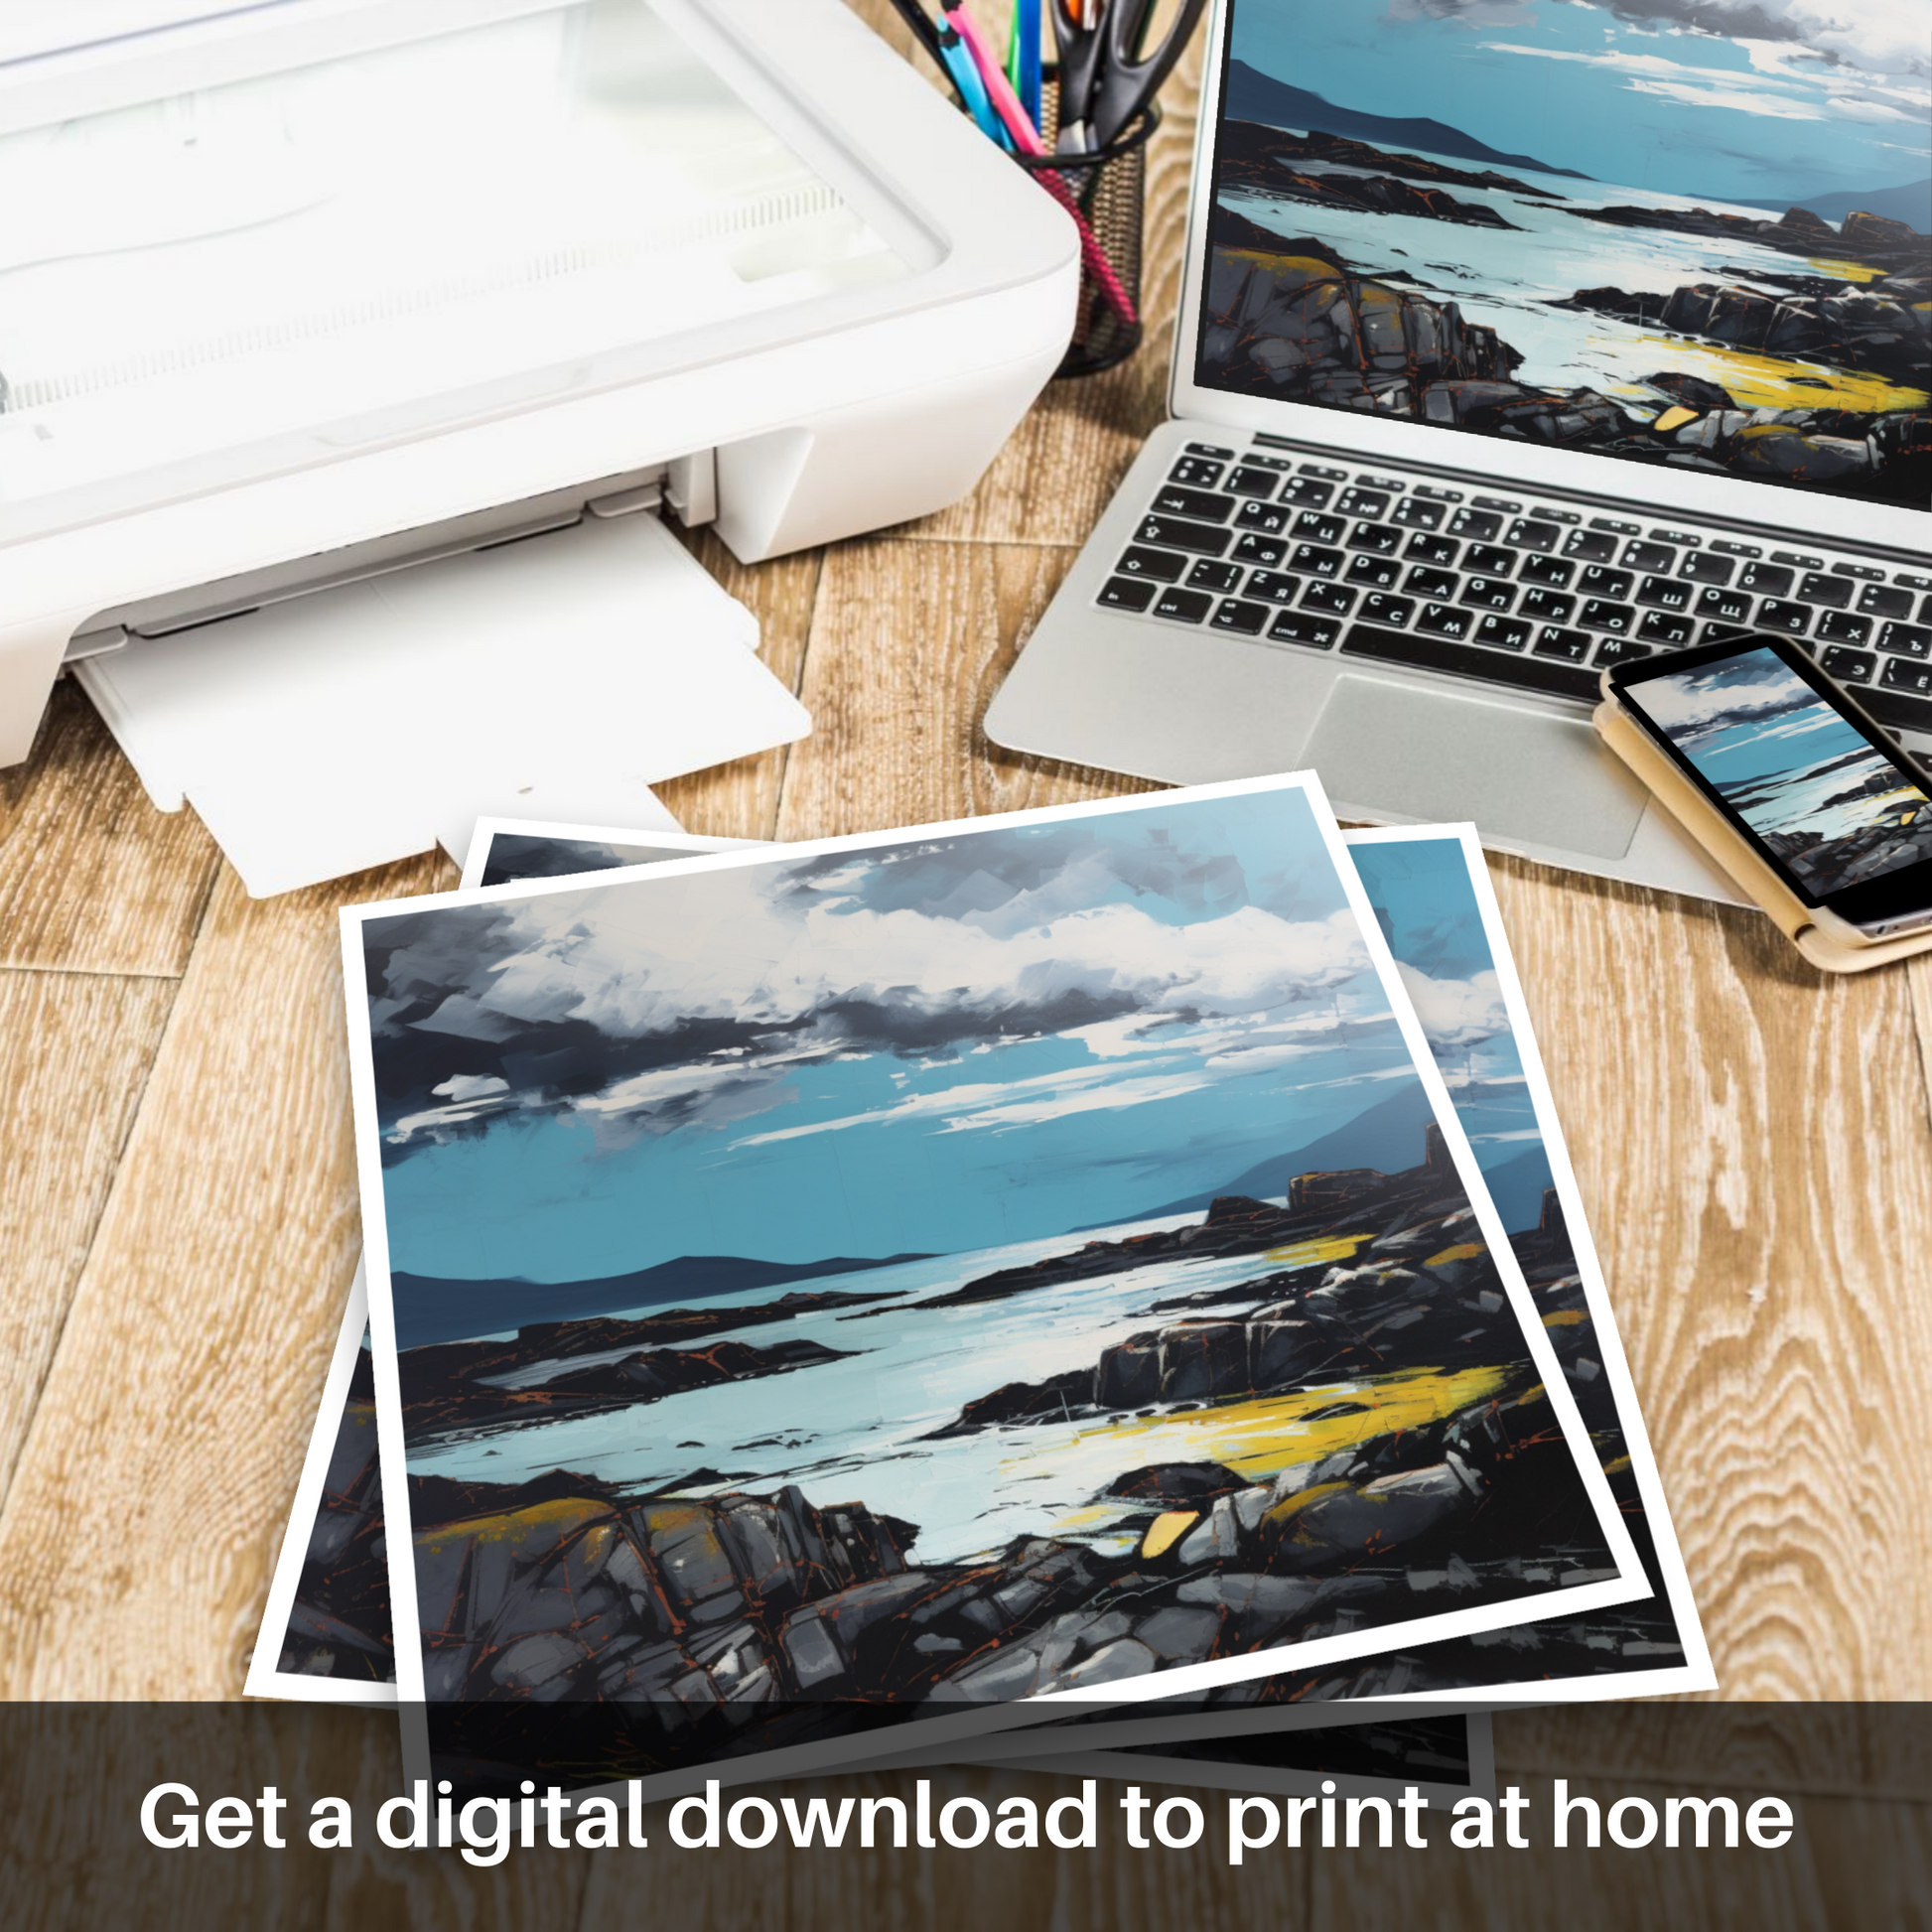 Downloadable and printable picture of Isle of Harris, Outer Hebrides